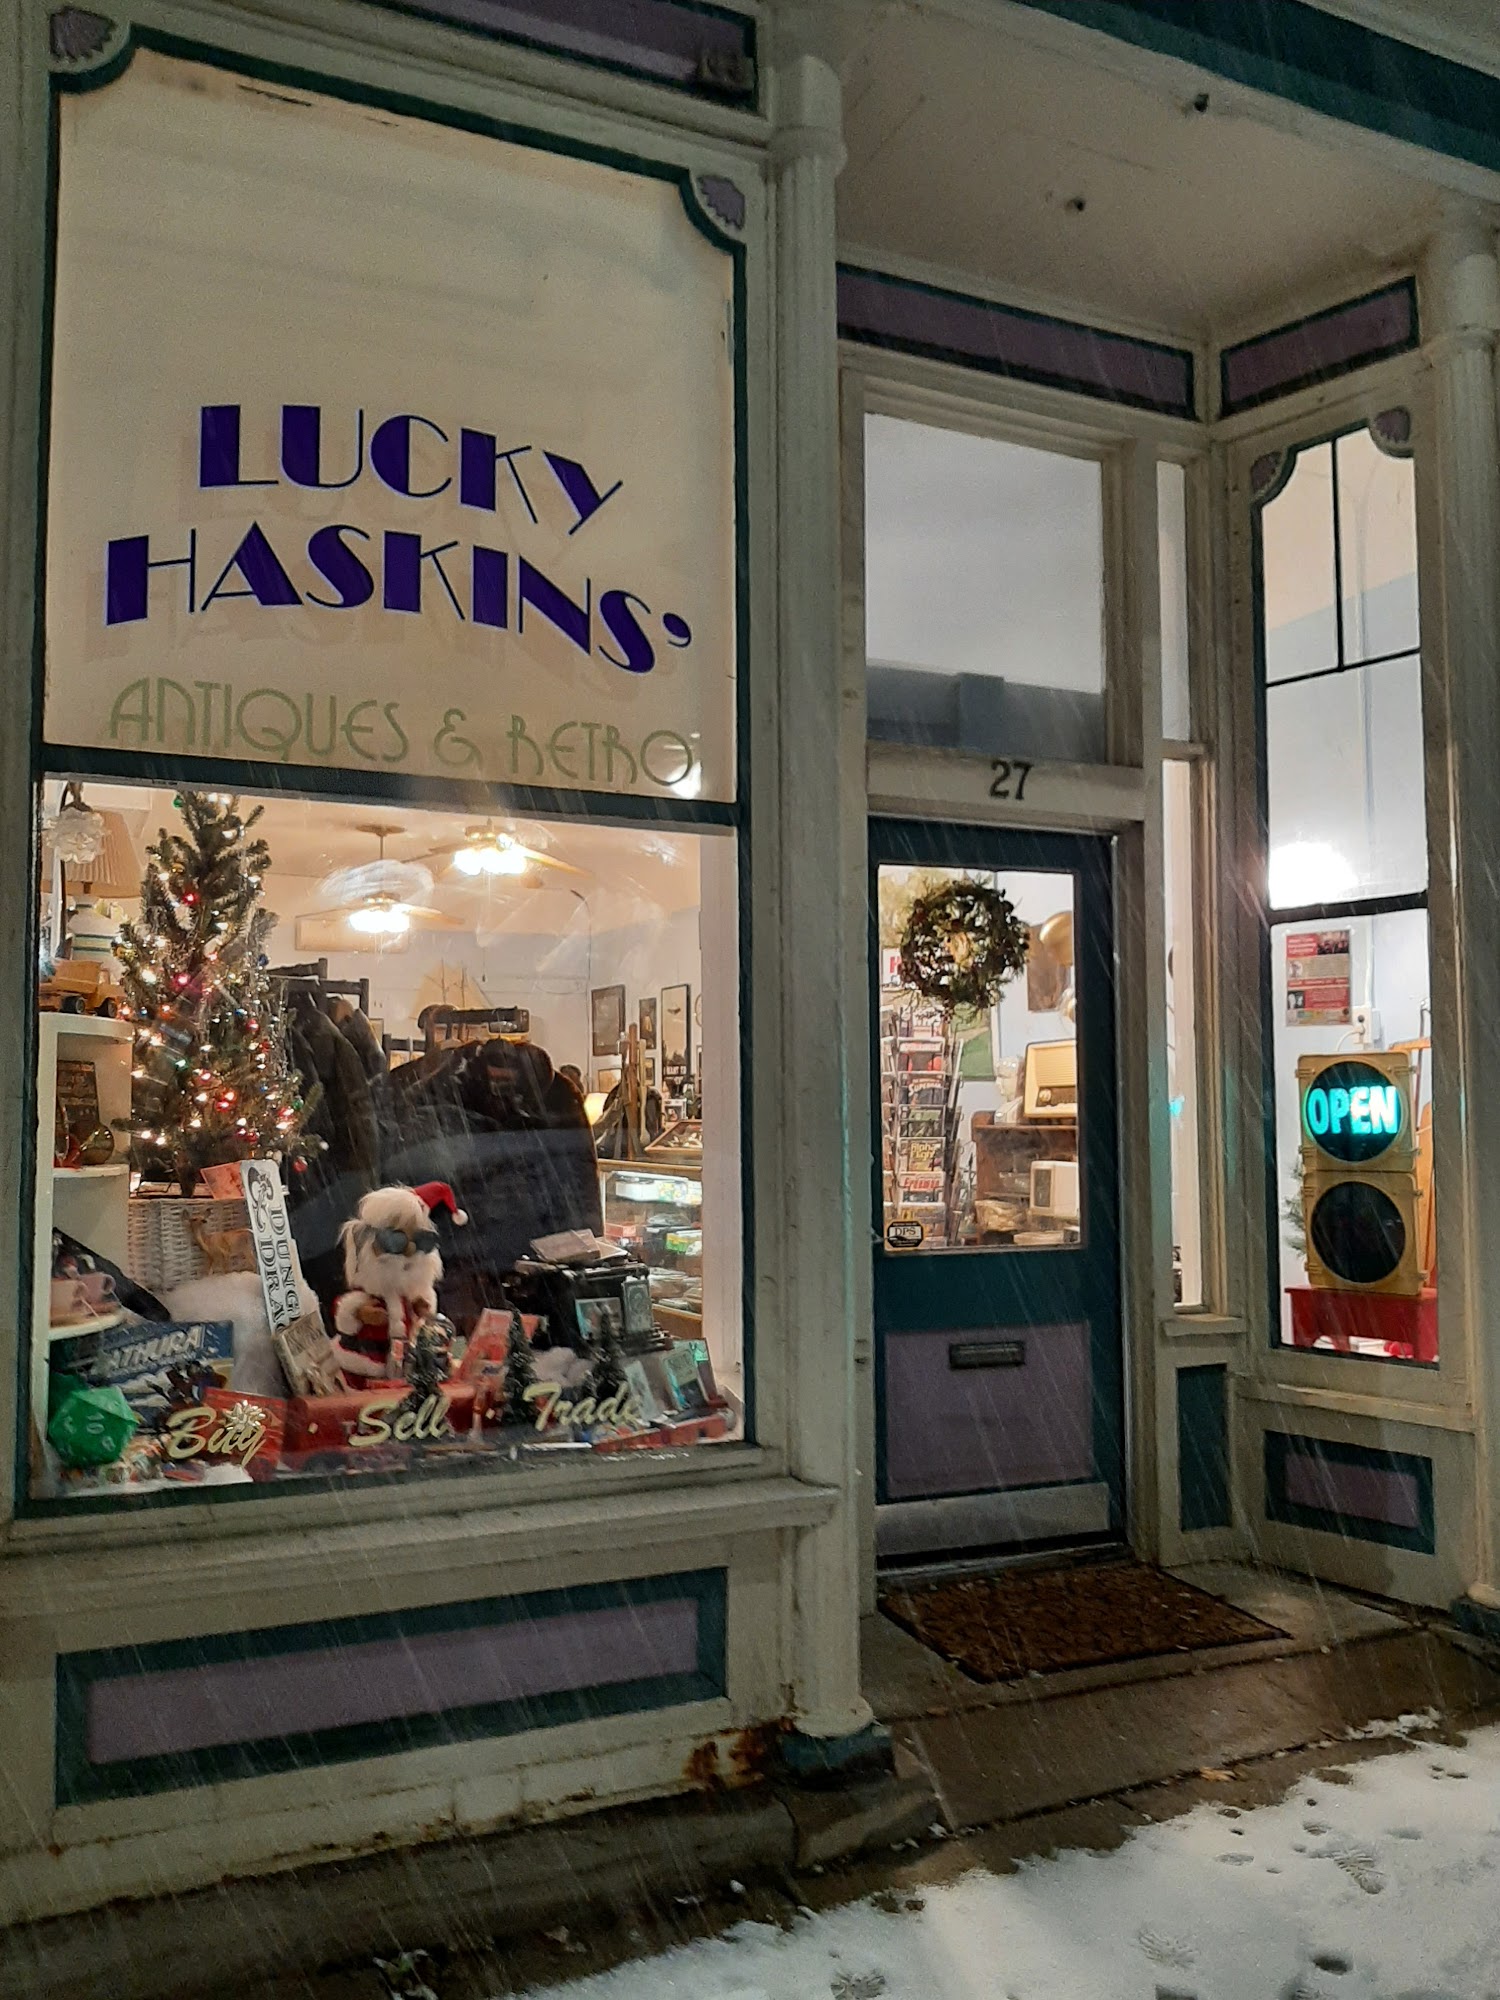 Lucky Haskins Antiques and Retro